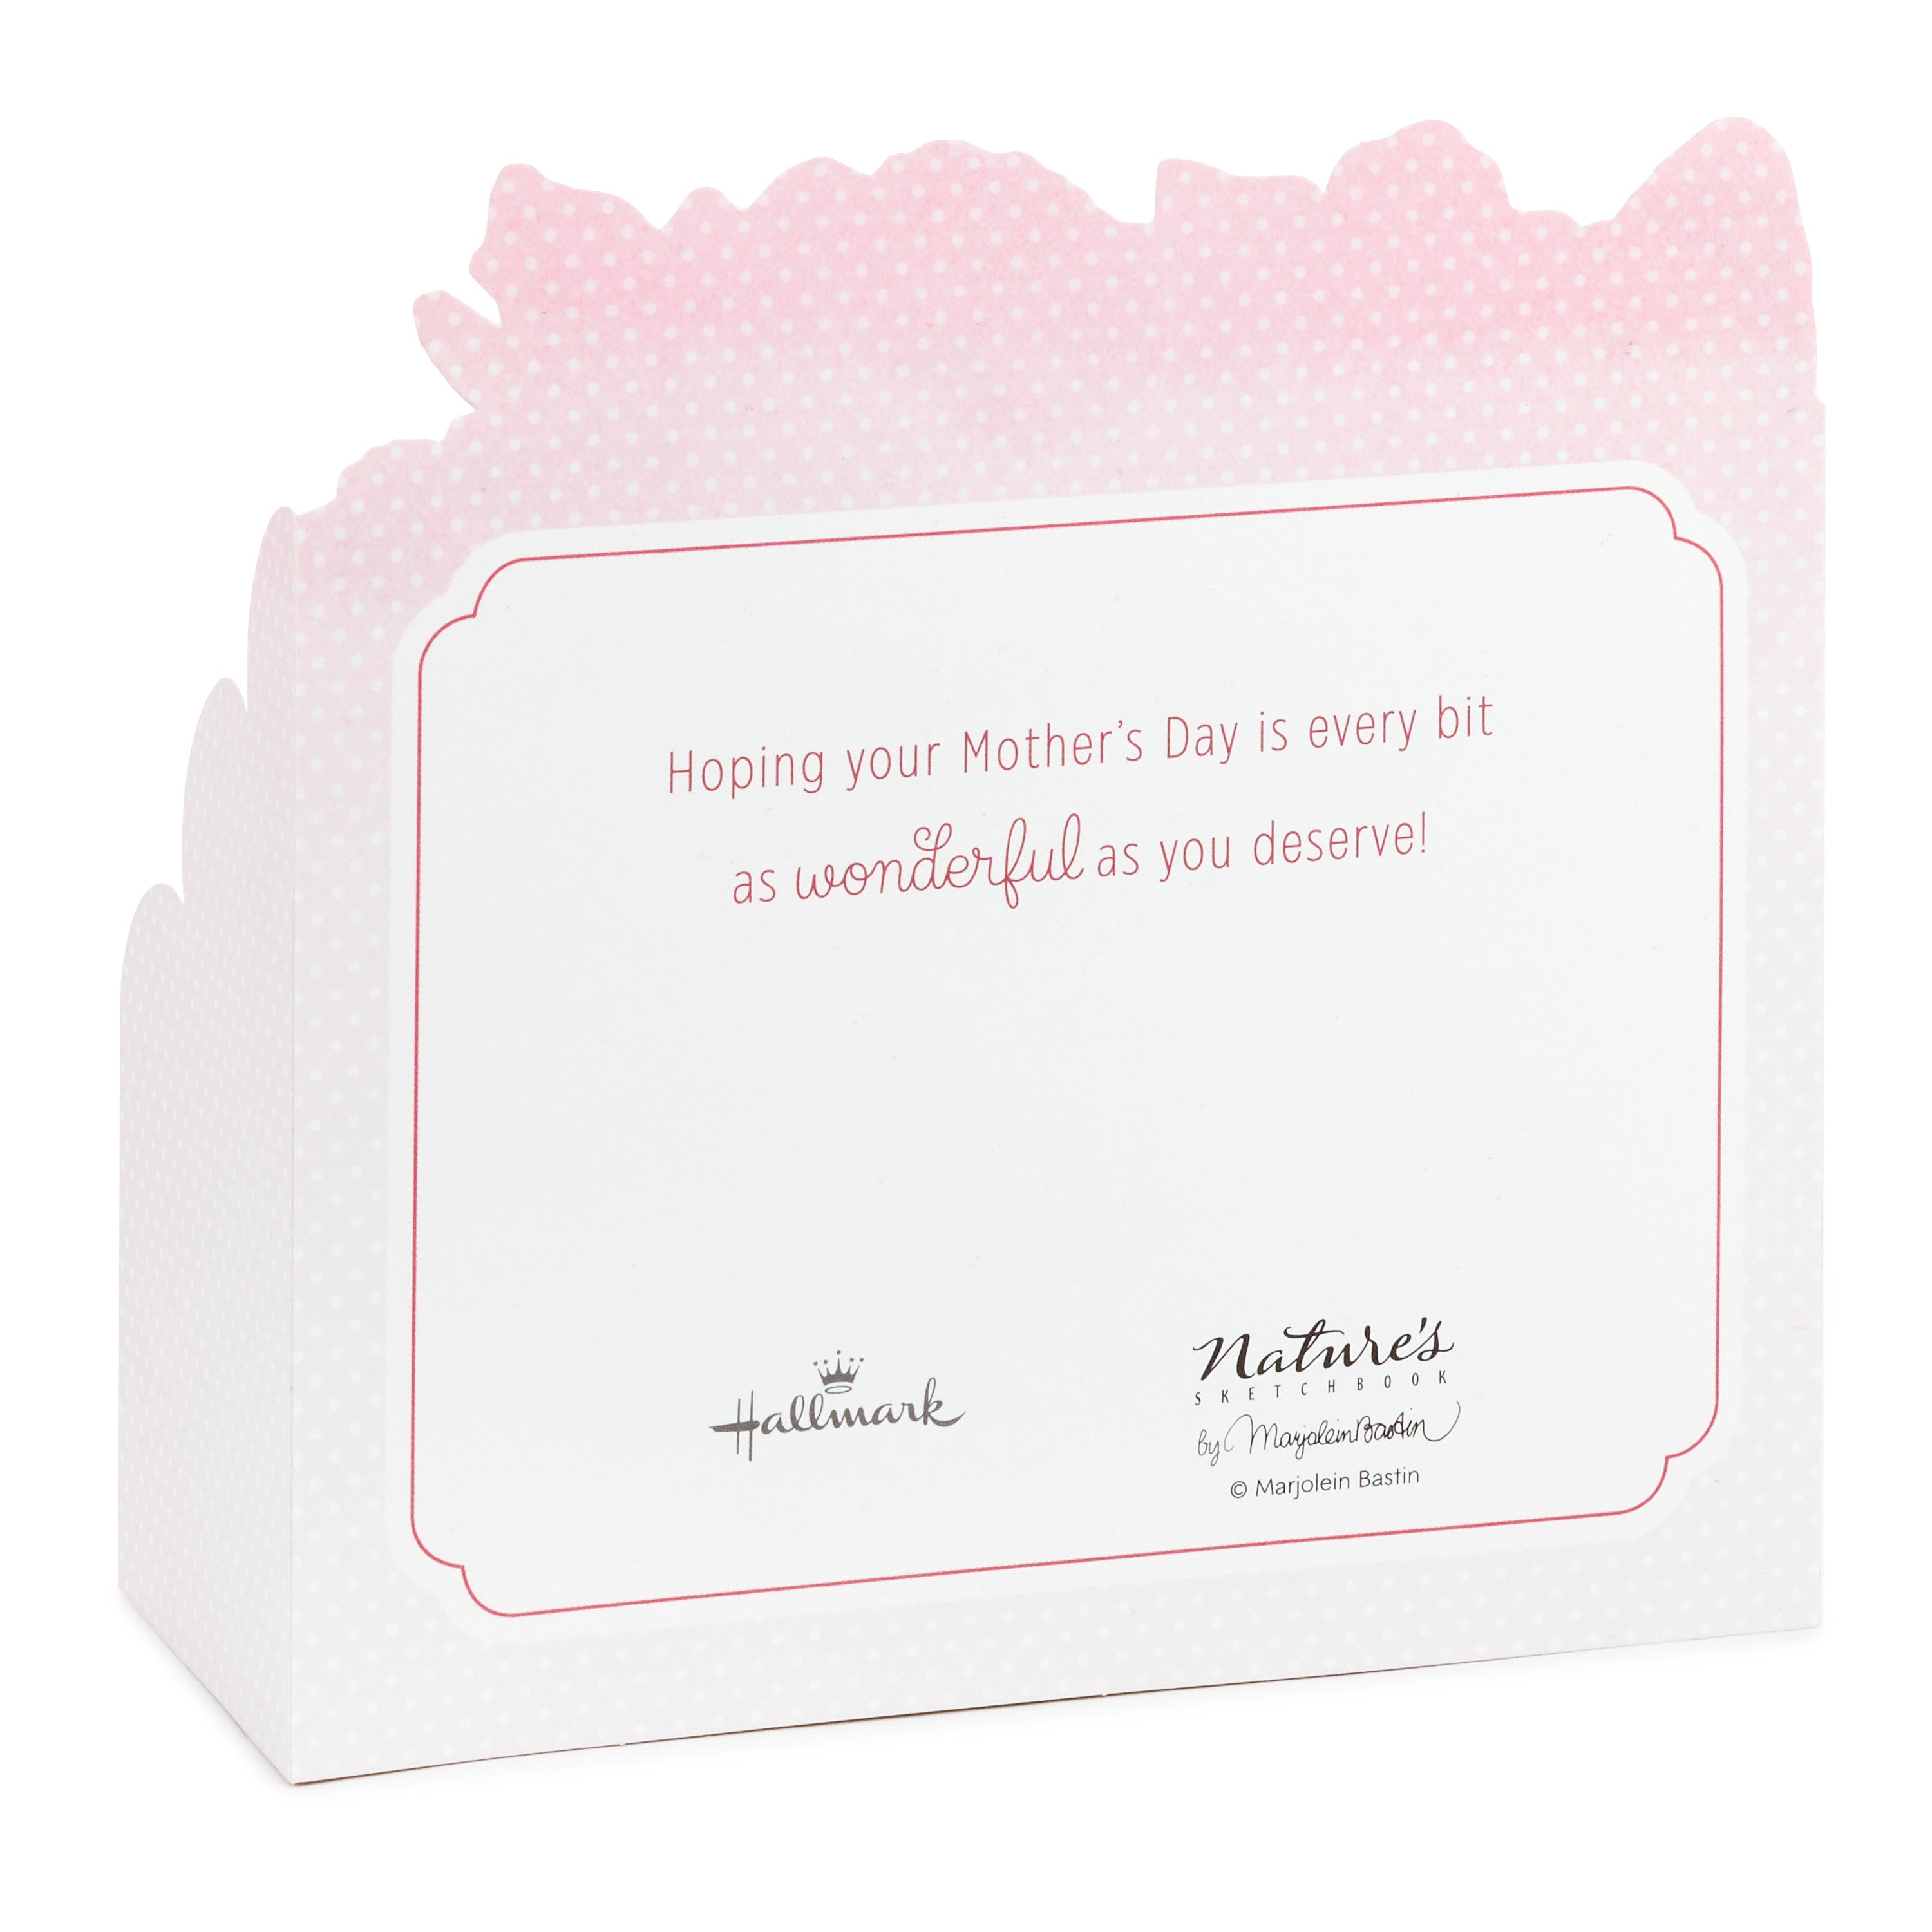 Paper Wonder Pop Up Mothers Day Card (Marjolein Bastin, Beautiful Day)